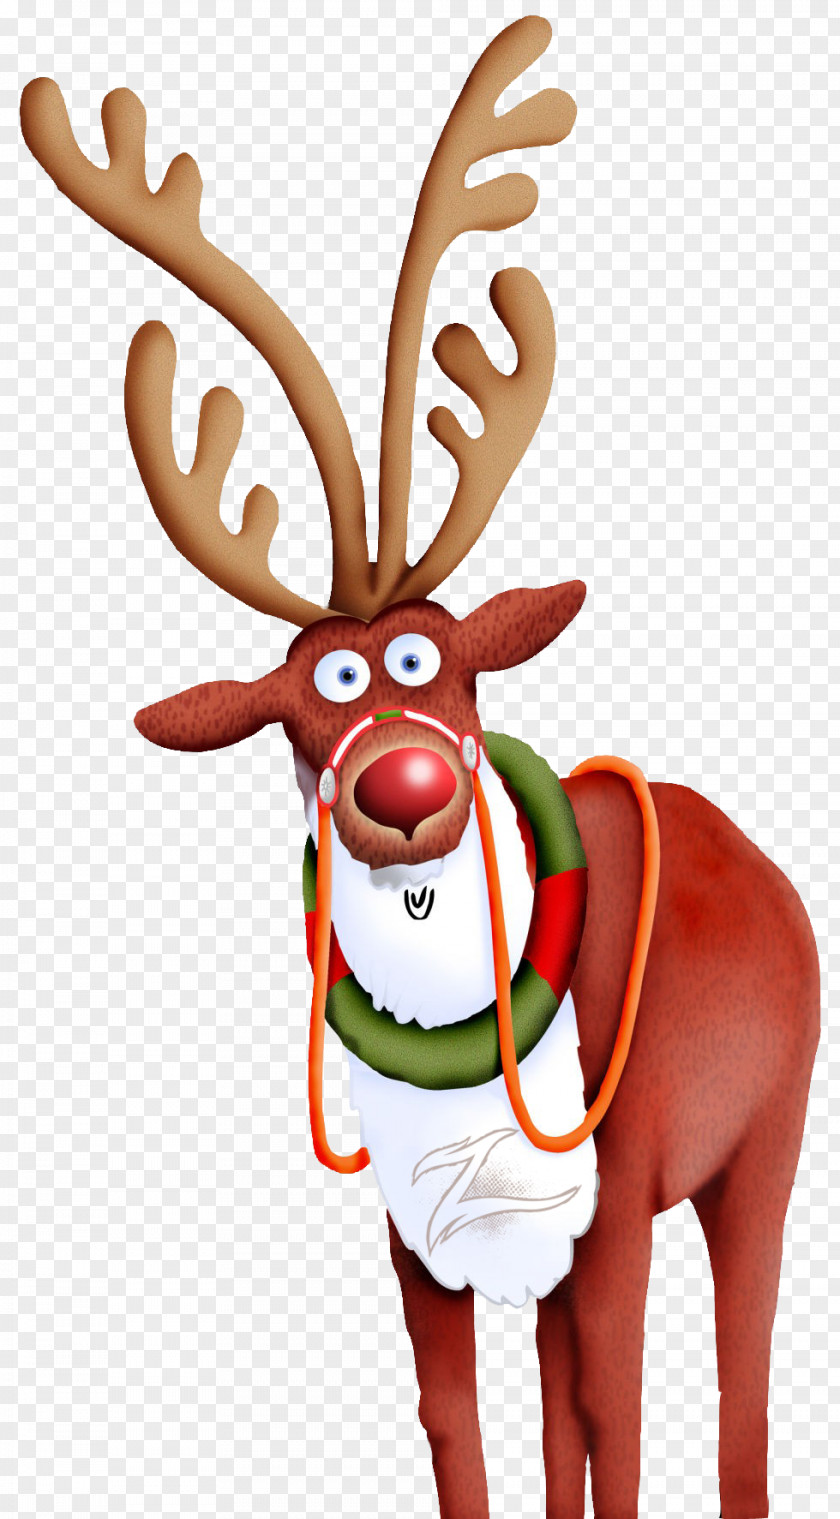 Reindeer Rudolph Santa Claus Candy Cane Christmas PNG